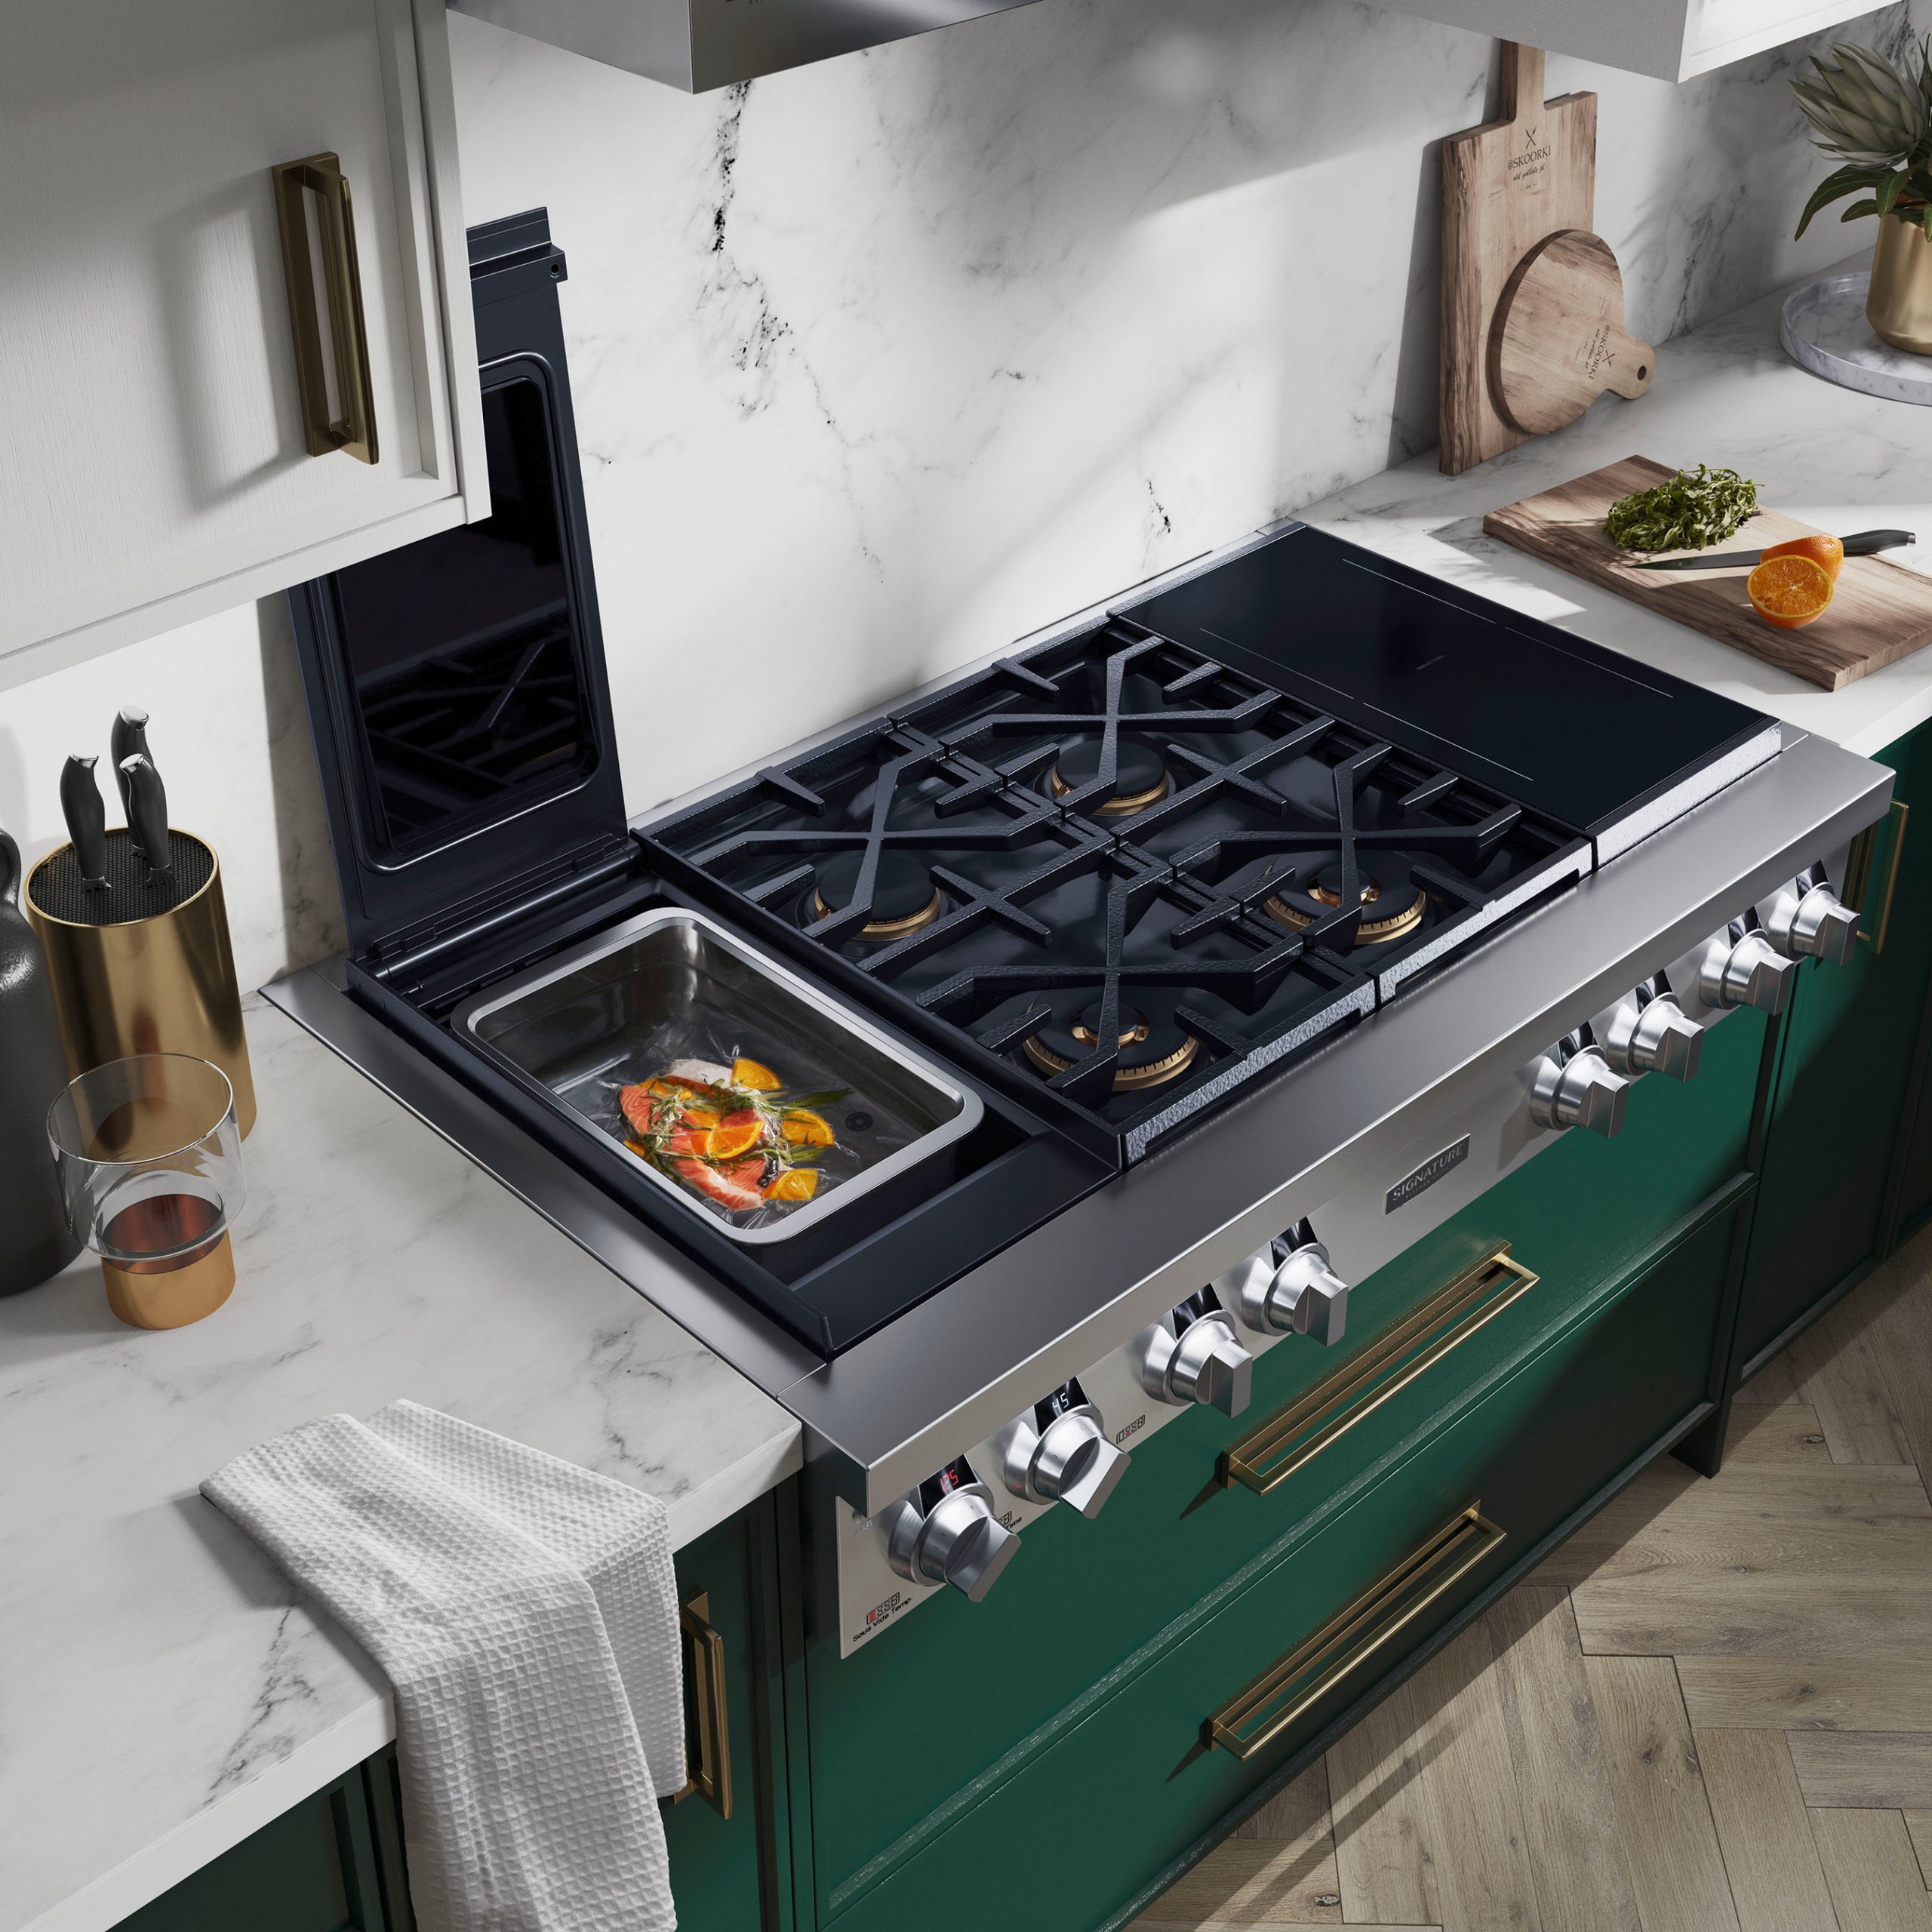 Signature Kitchen Suite is debuting its broadened portfolio of industry-first culinary innovations that will join the brand’s award-winning line of luxury, built-in appliances.